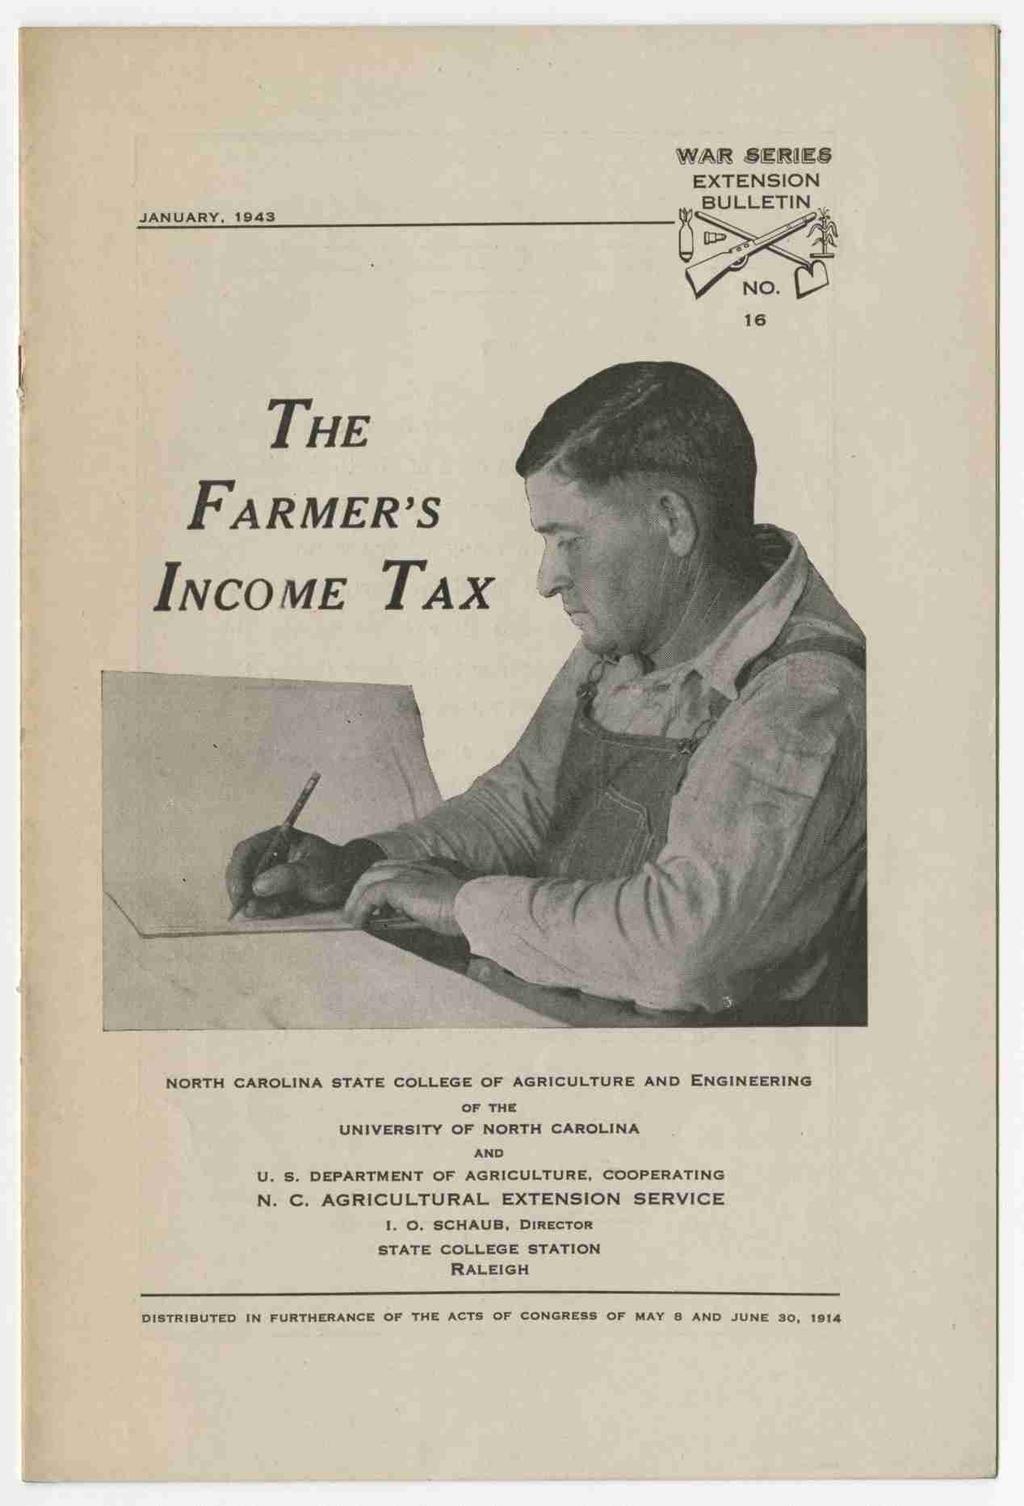 4 meal JAN UARY, 1943 WAR SERIES EXTENSION BULLETIN, \/ HE - FARMER S INCOME TAX 1- NORTH CAROLINA STATE COLLEGE OF AGRICULTURE AND ENGINEERING OF THE UNIVERSITY OF NORTH CAROLINA AND U. 5.